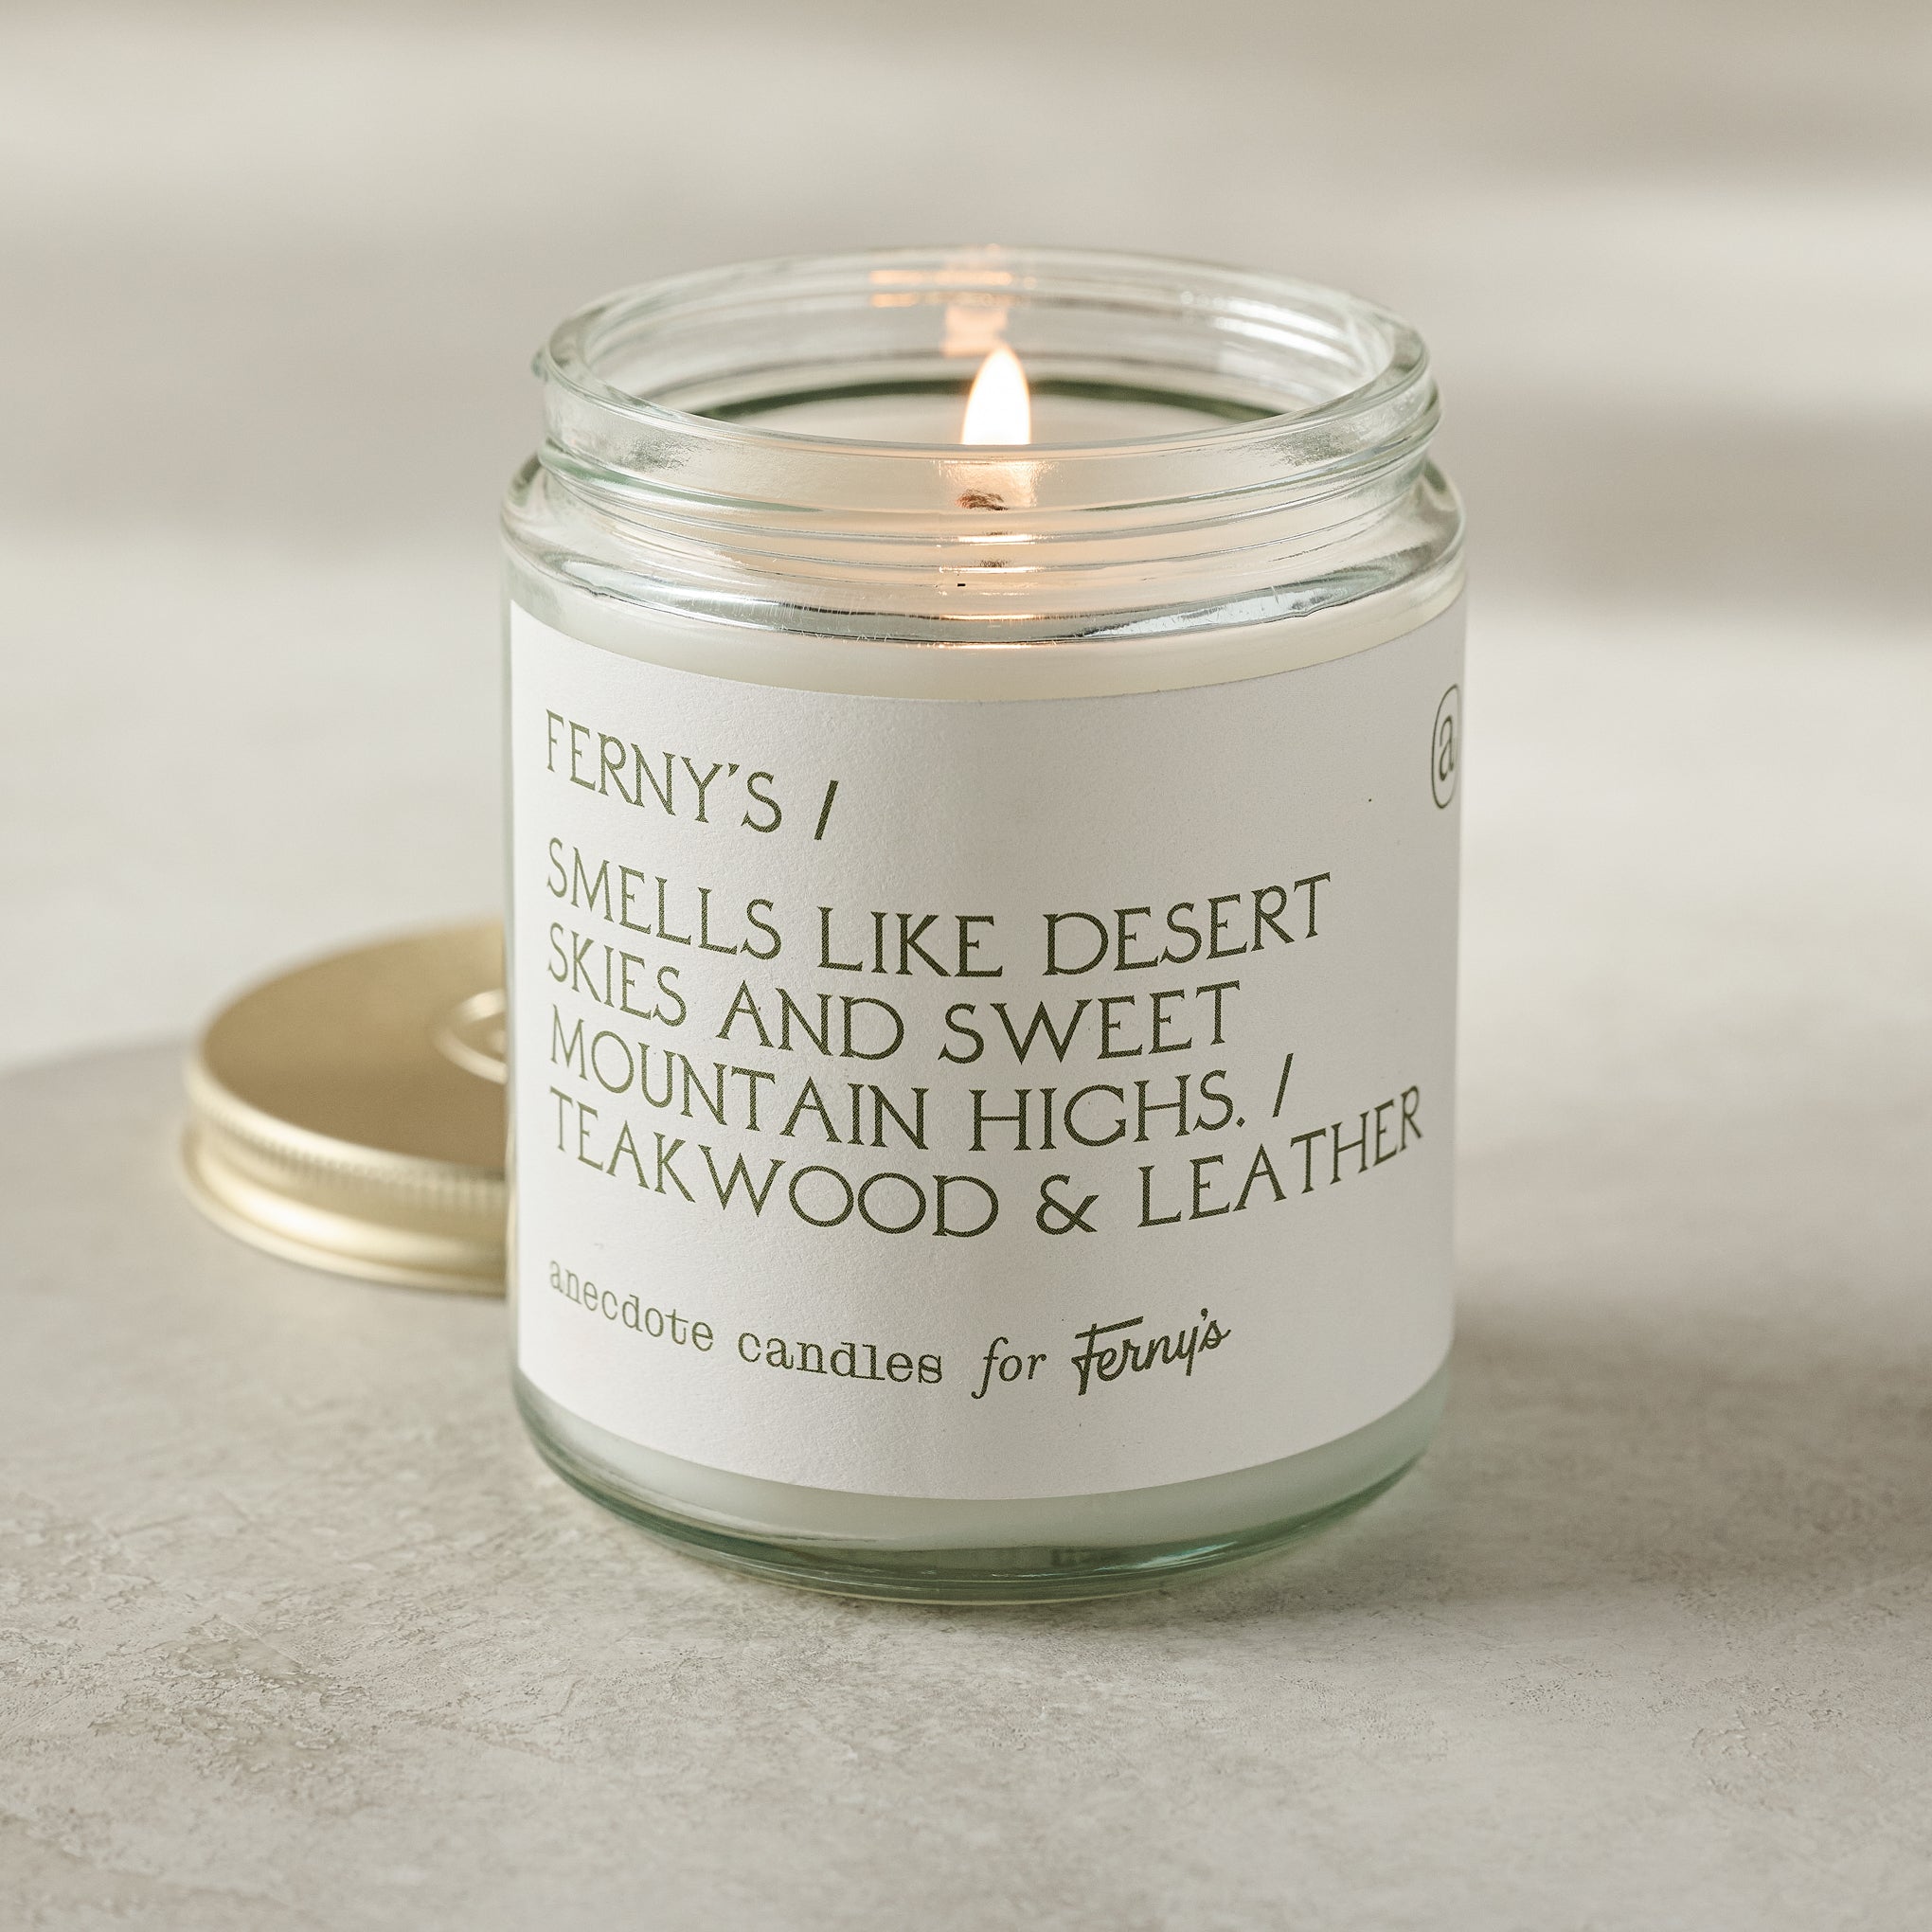 Ferny's Desert Skies & Mountain Highs Candle $28.00